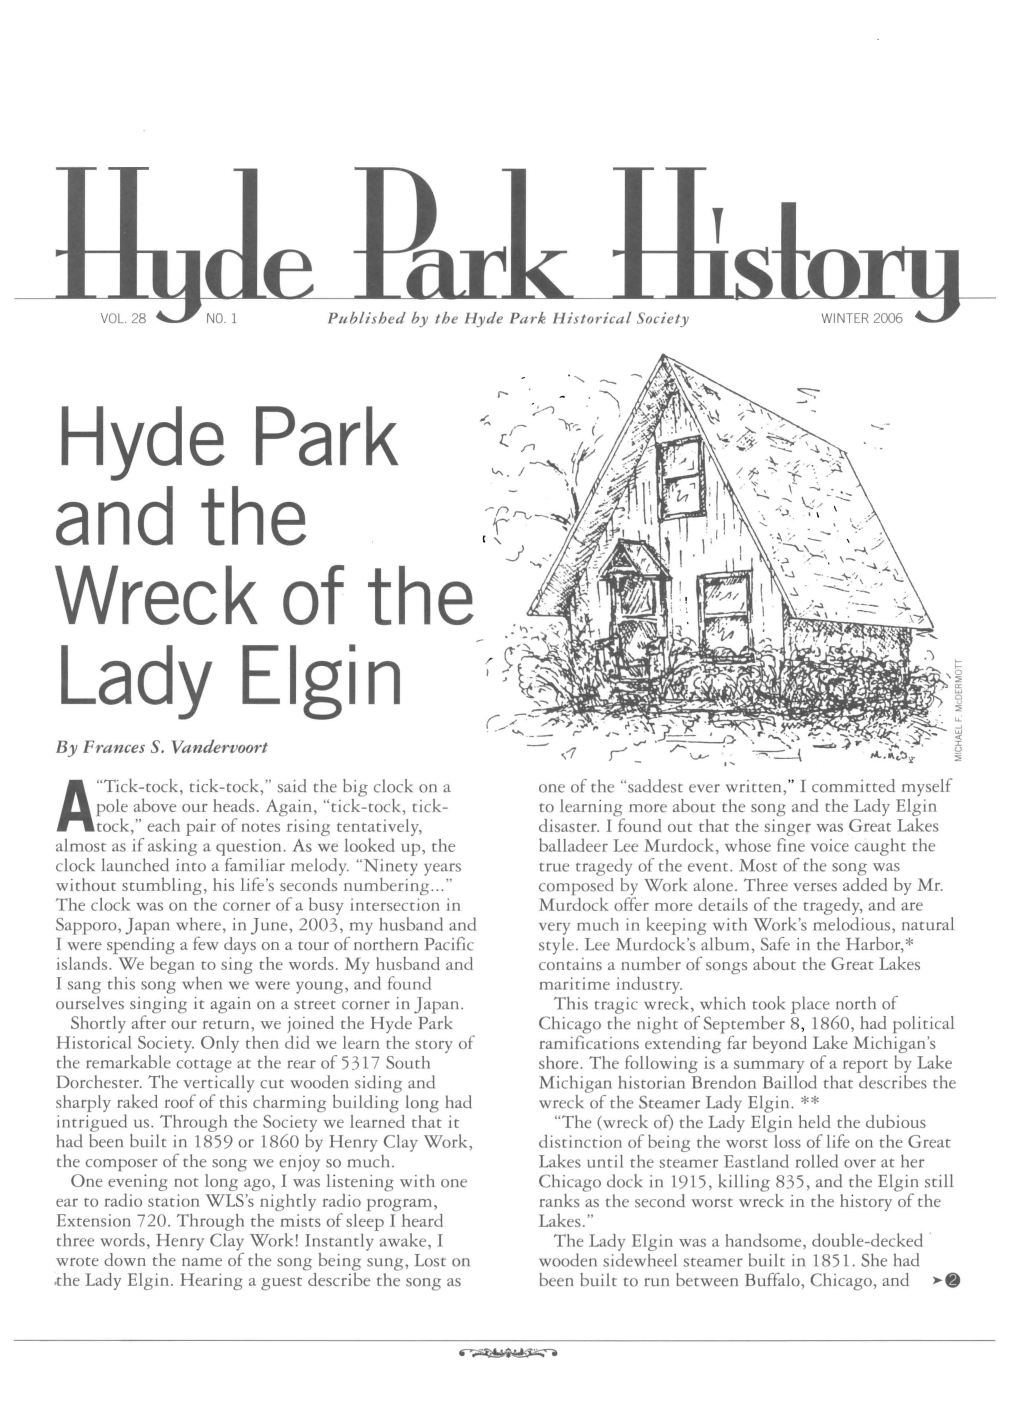 Hyde Park and the Wreck of the Lady Elgin